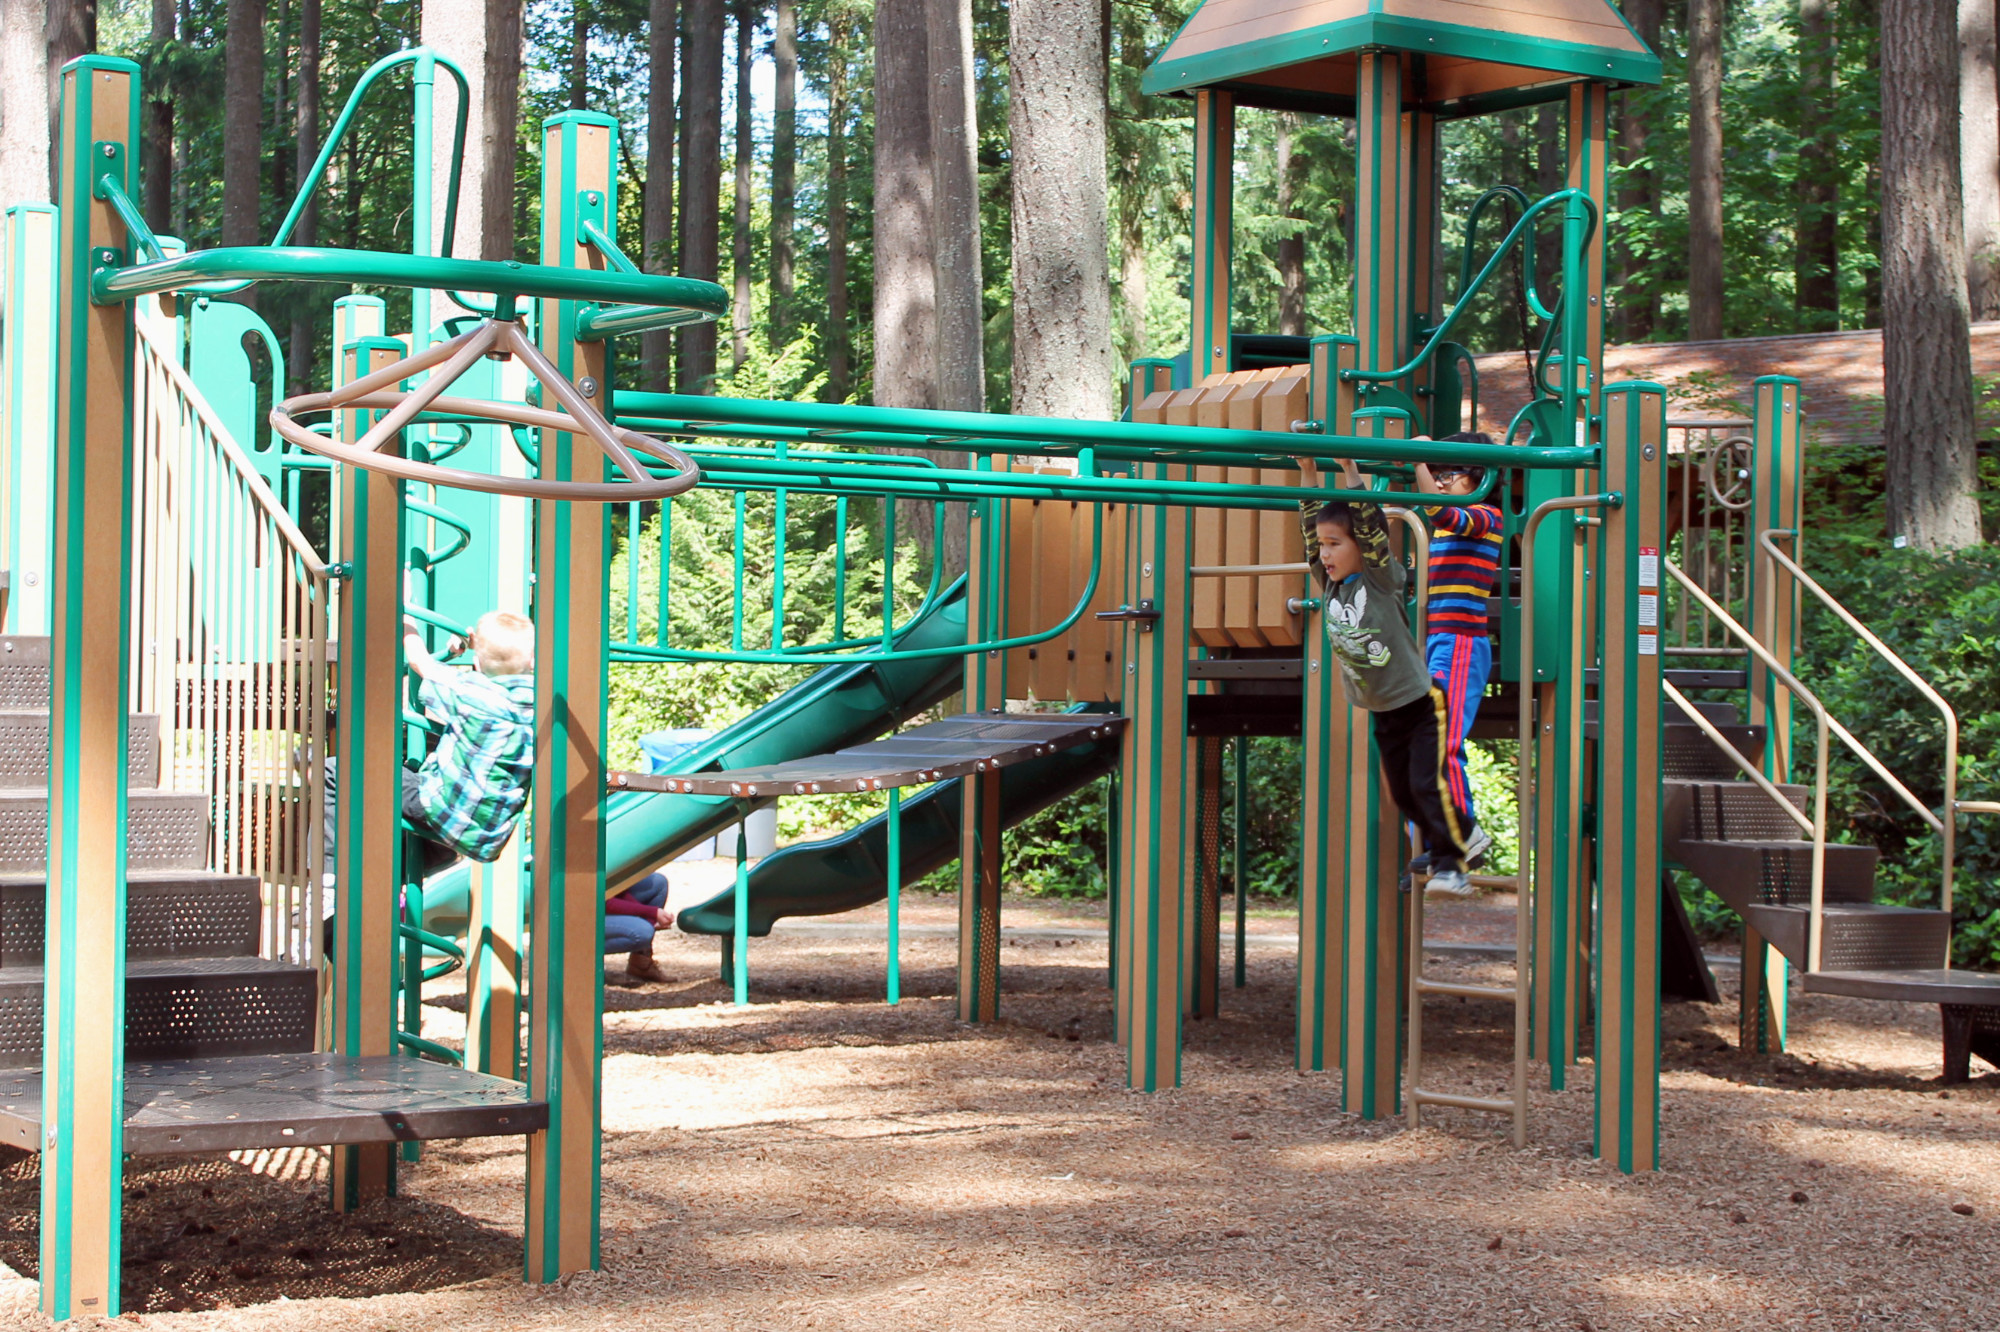 Kids playing monkey bars at Pine Lake Park playground. There's dappled shade over the wood chip play area.